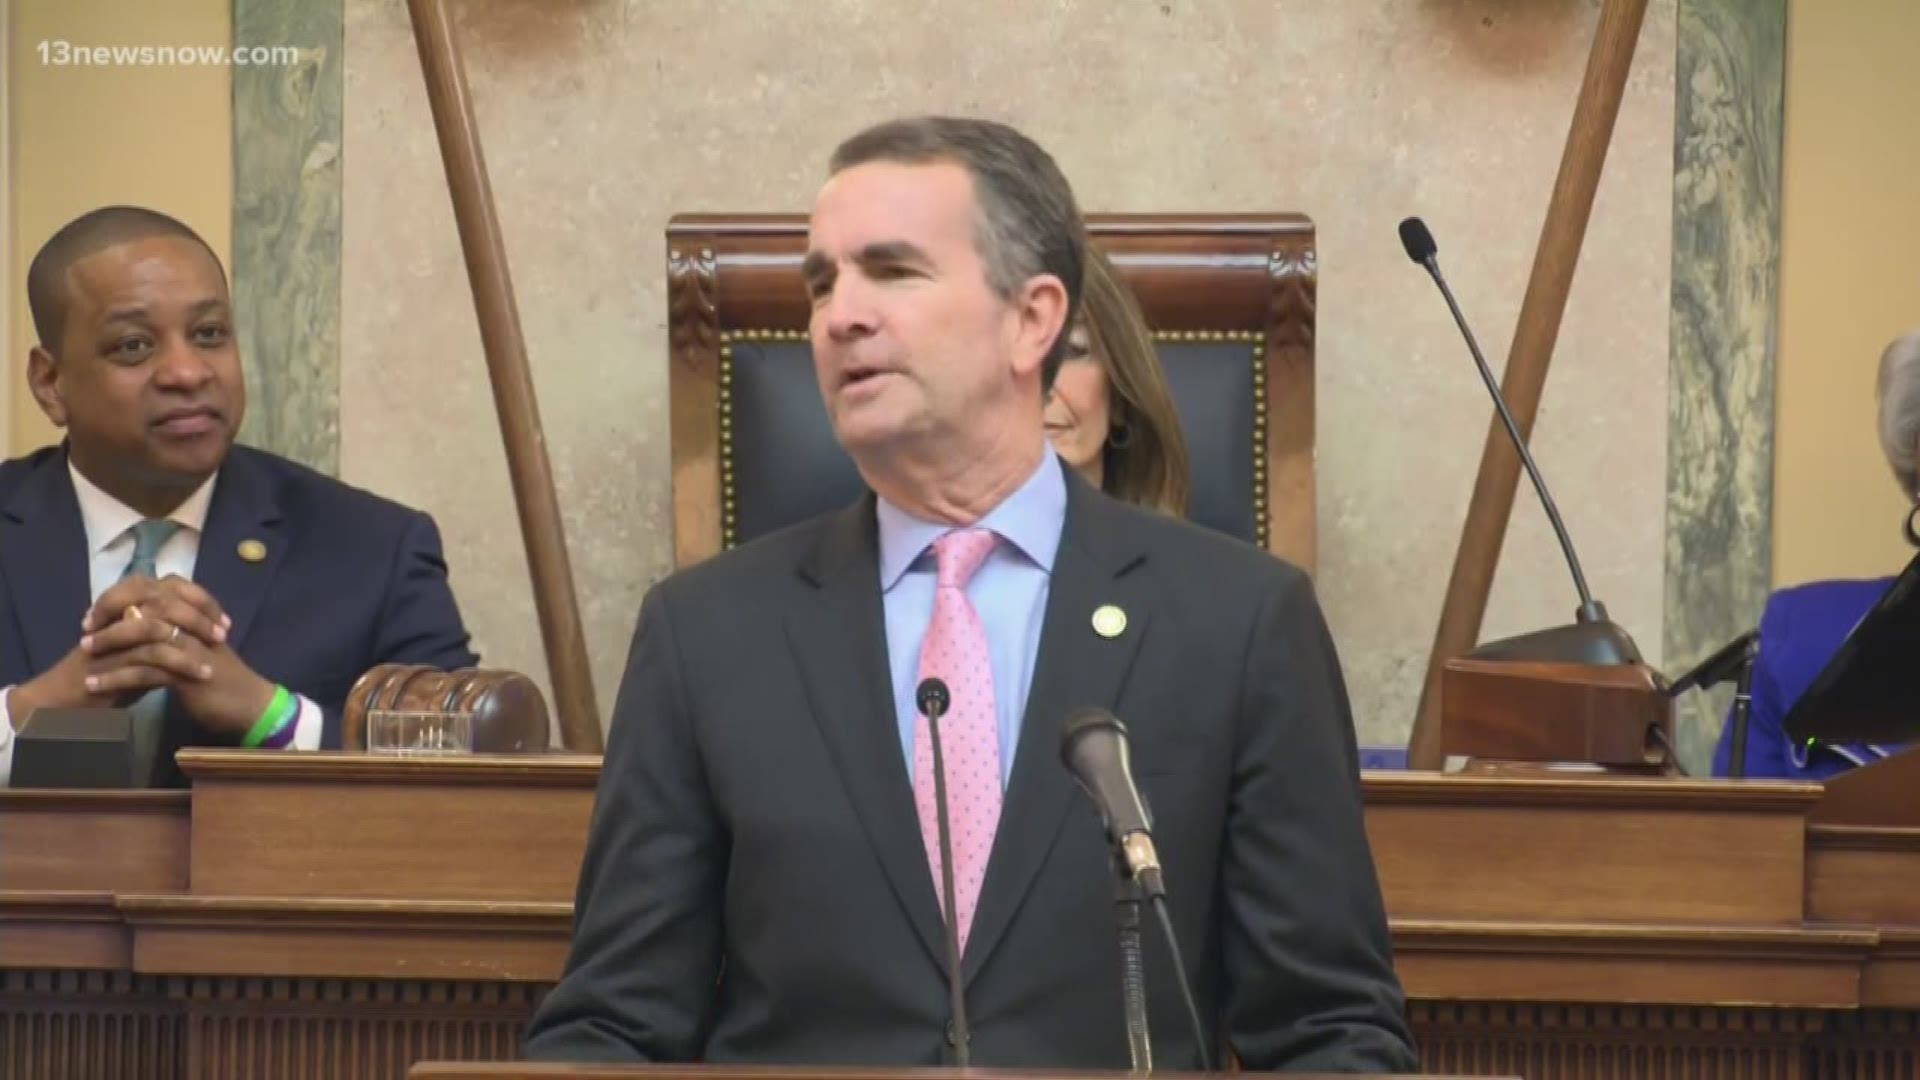 13News Now Megan Shinn spoke to Political Analyst Quentin Kidd about the temporary emergency Governor Northam declared to ban weapons at the Capitol ahead of a rally